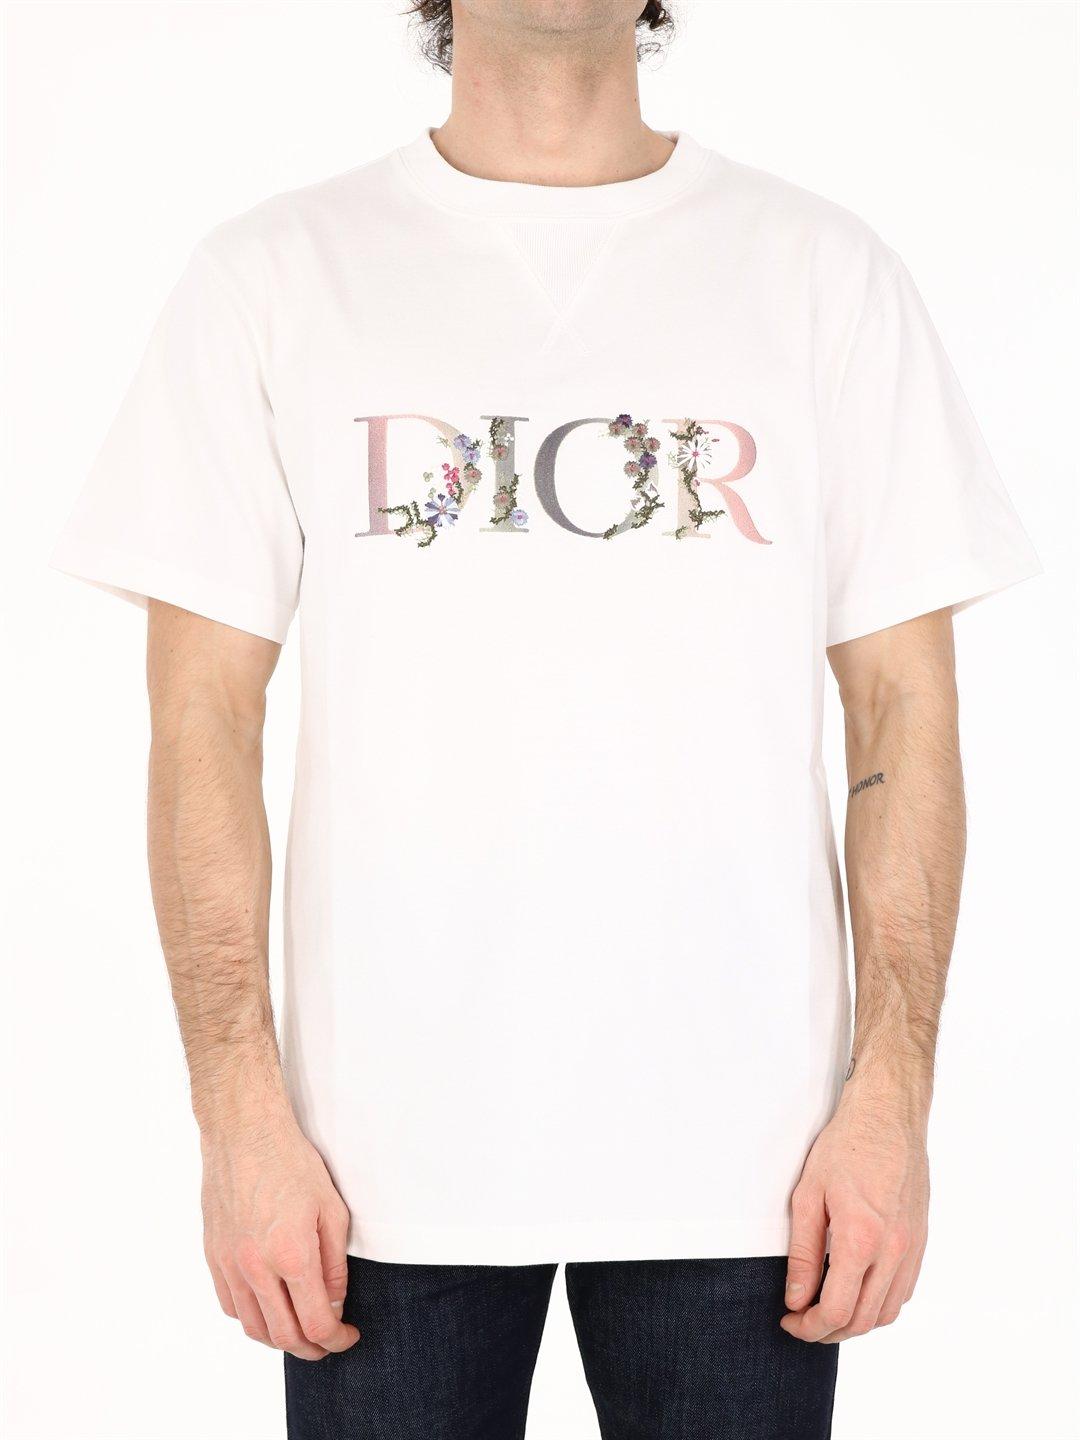 Dior T-shirt Dior Flowers White for Men | Lyst